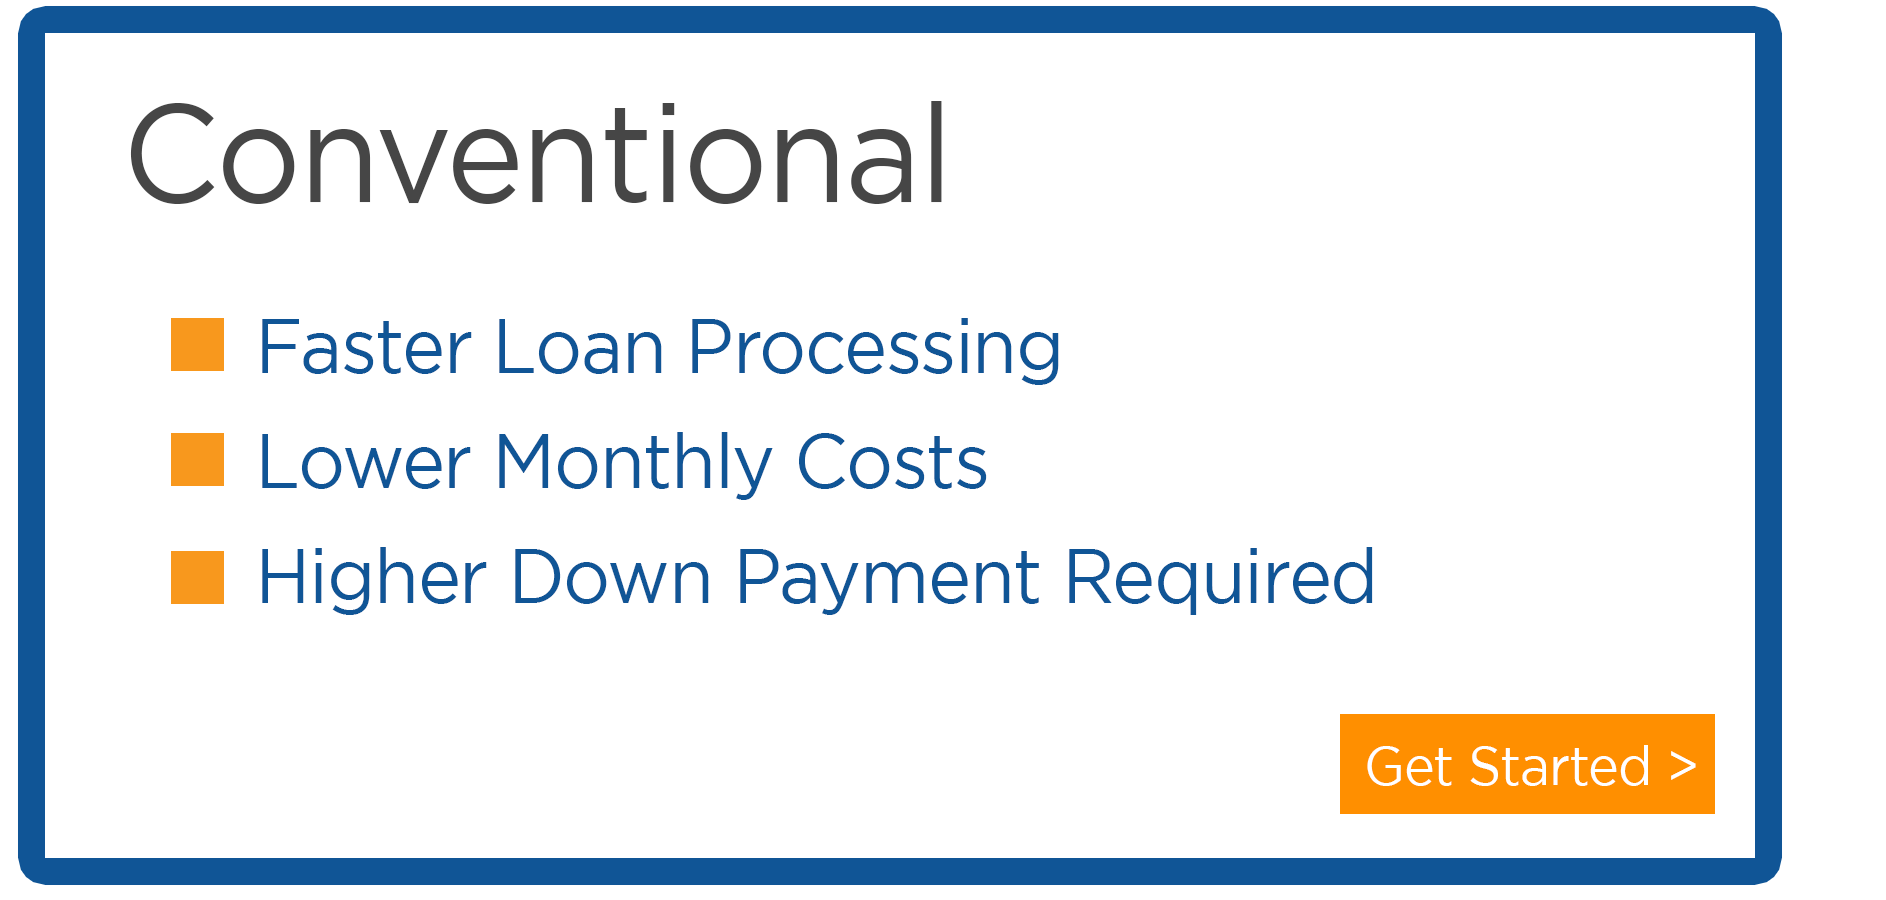 Pay as little as zero down payment at Central Sunbelt with a USDA loan